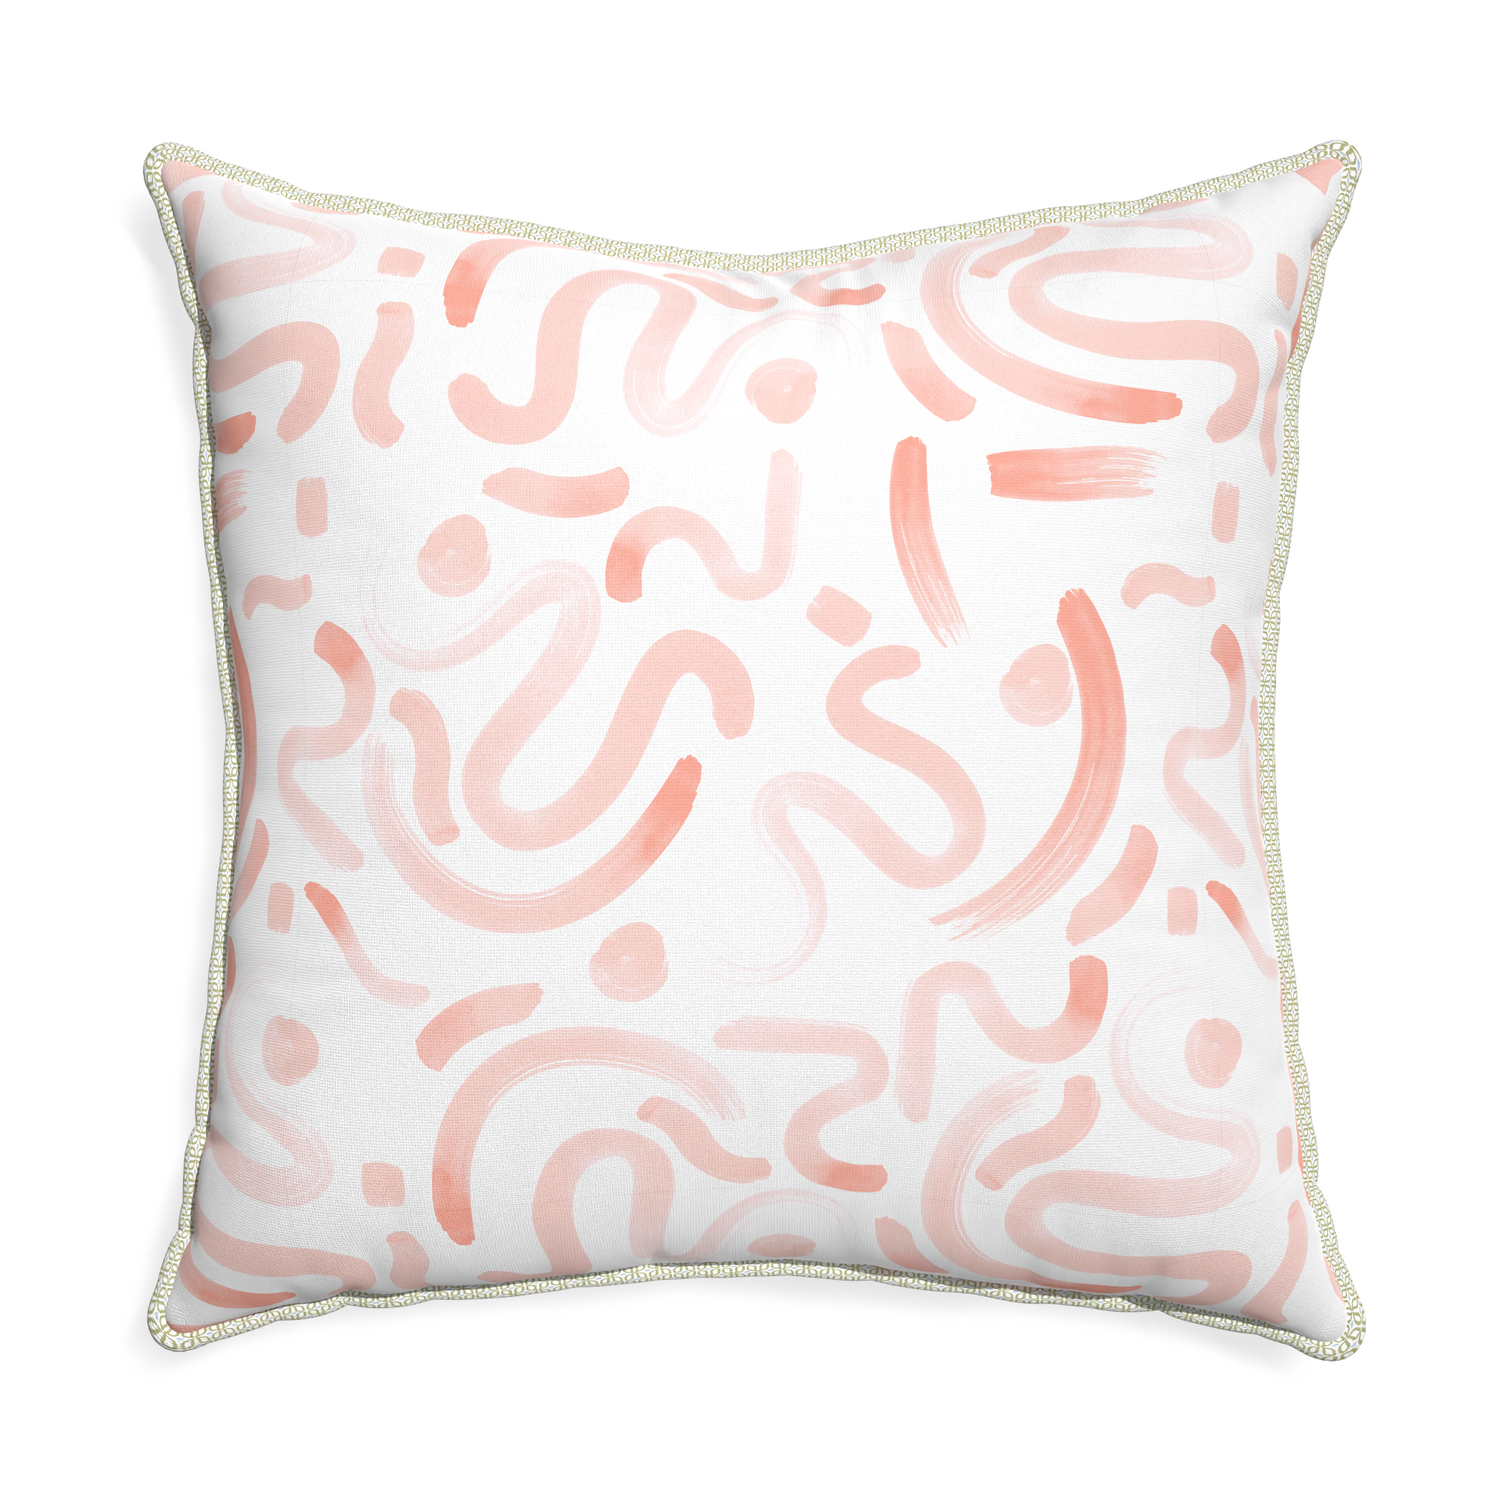 Euro-sham hockney pink custom pink graphicpillow with l piping on white background